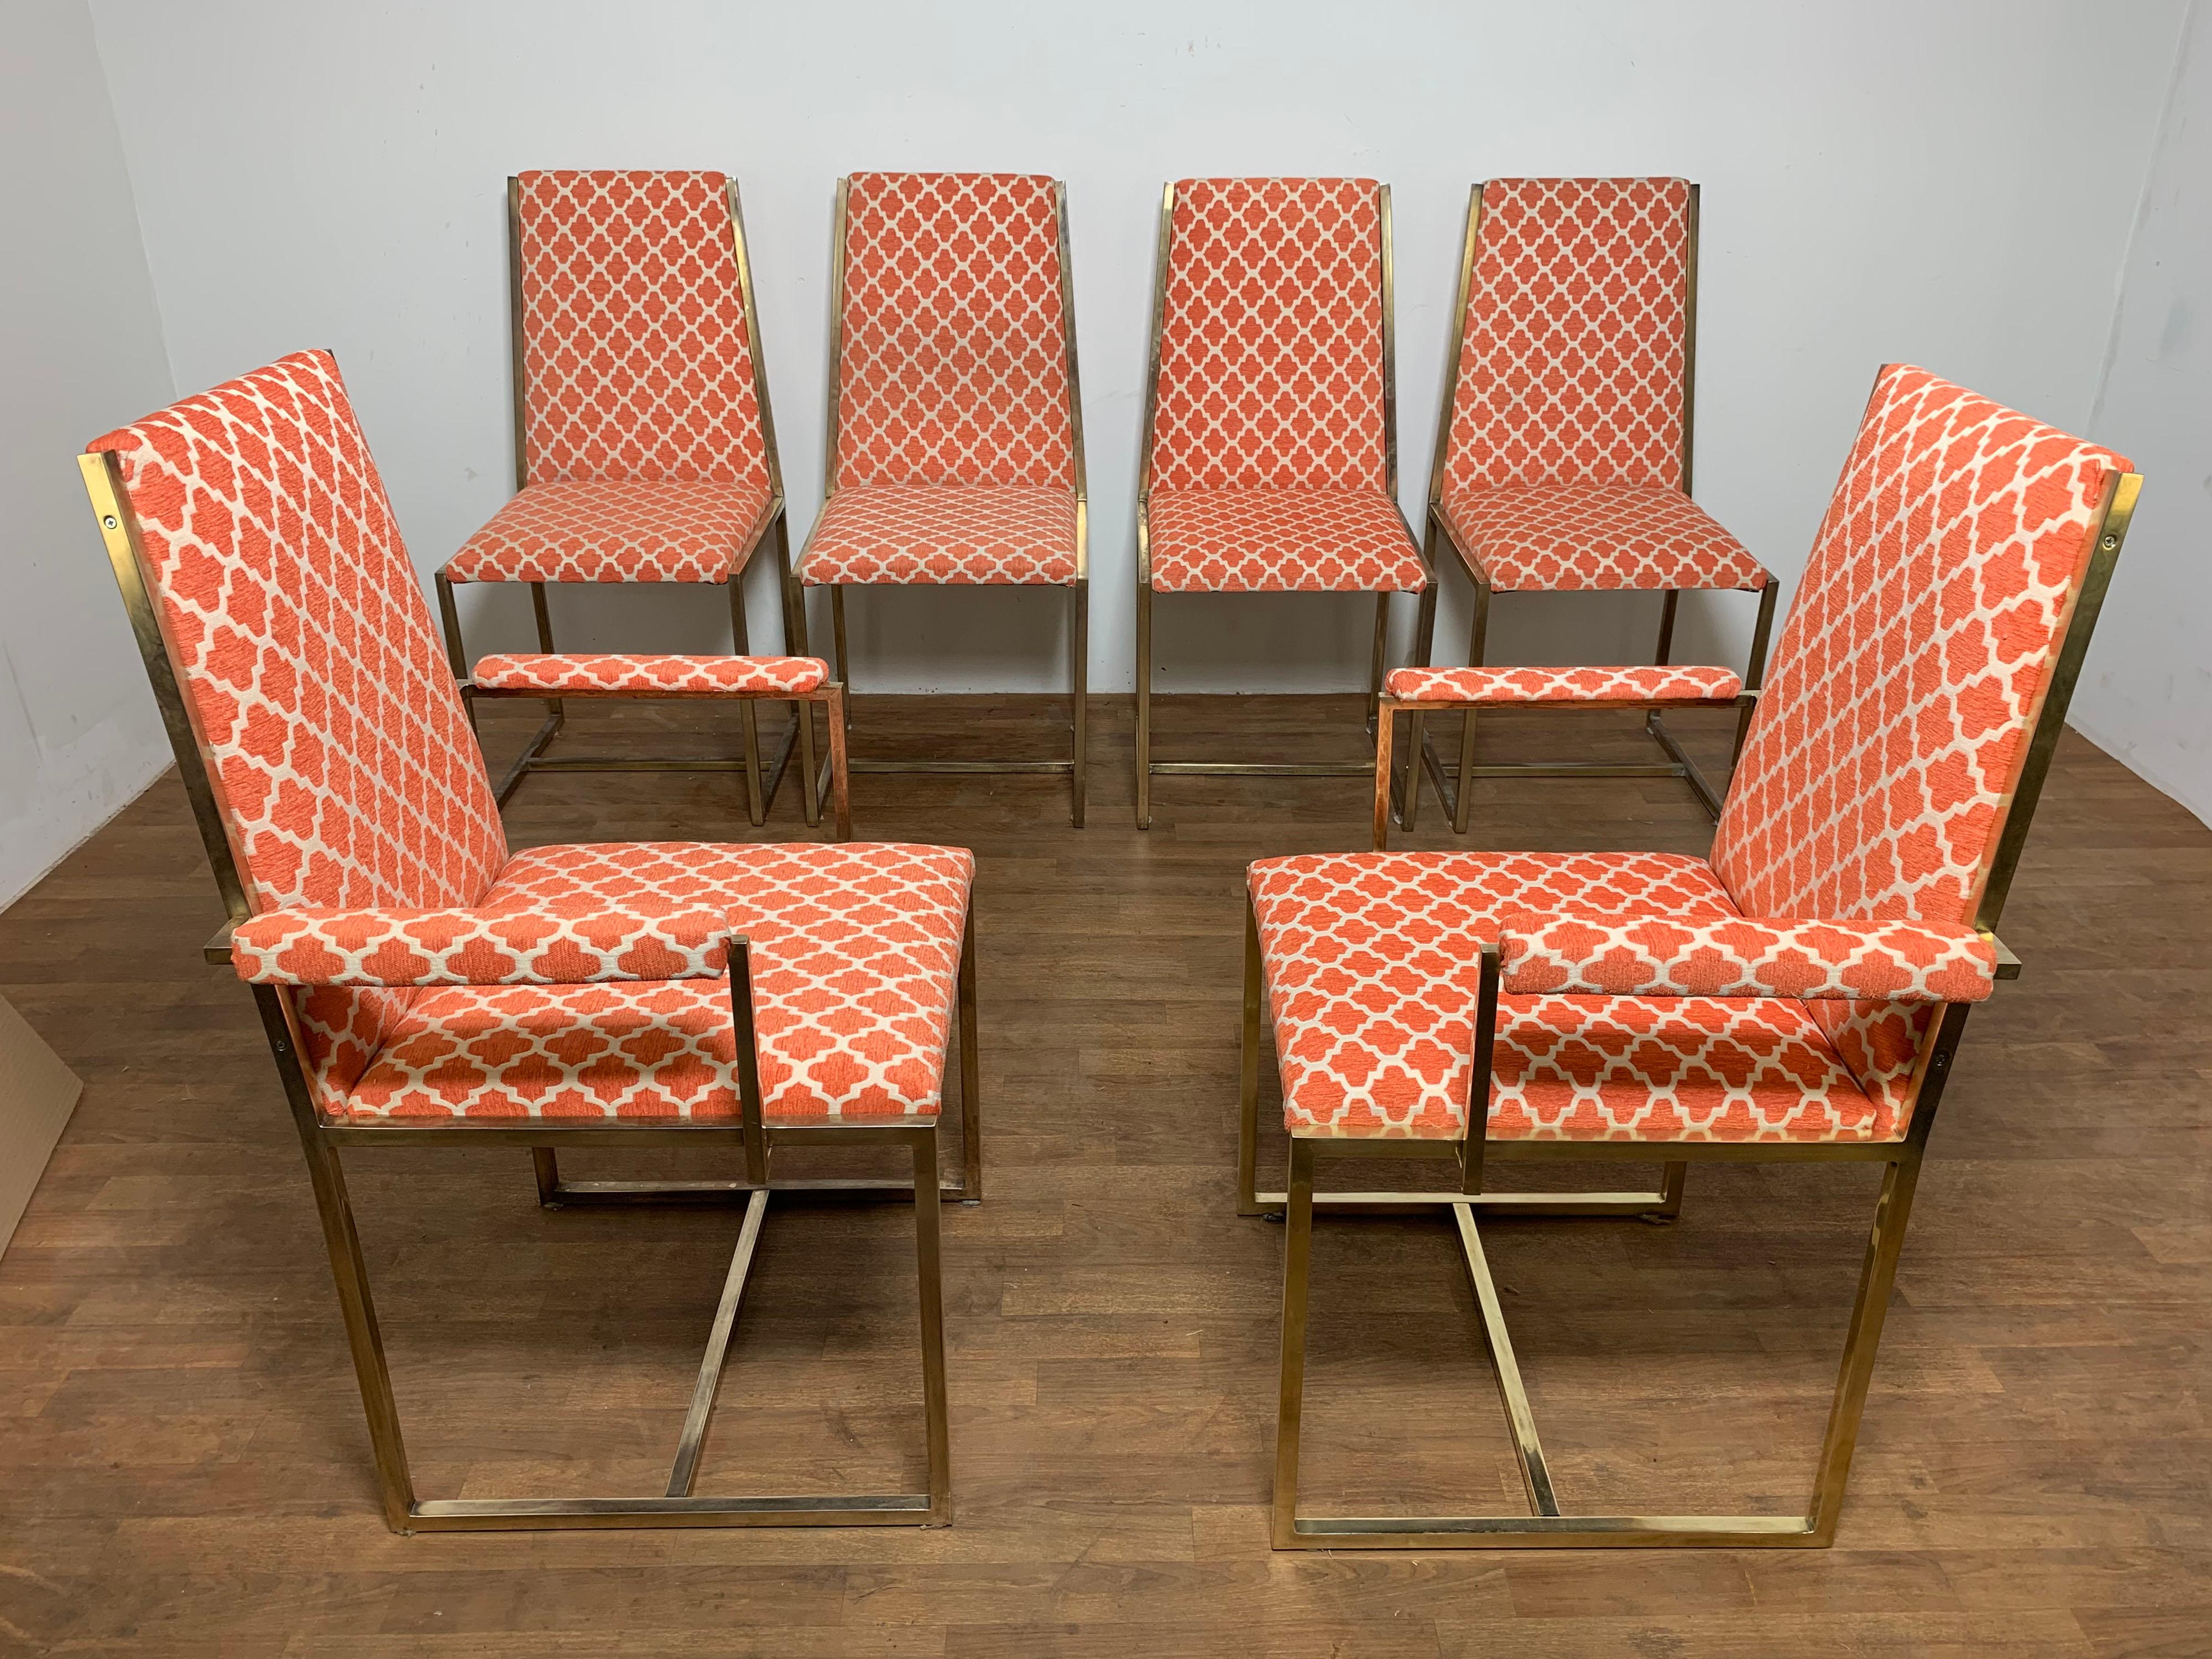 Set of six high back brass framed dining chairs by Mastercraft, circa 1960s. 

The arm chairs measure 24.75